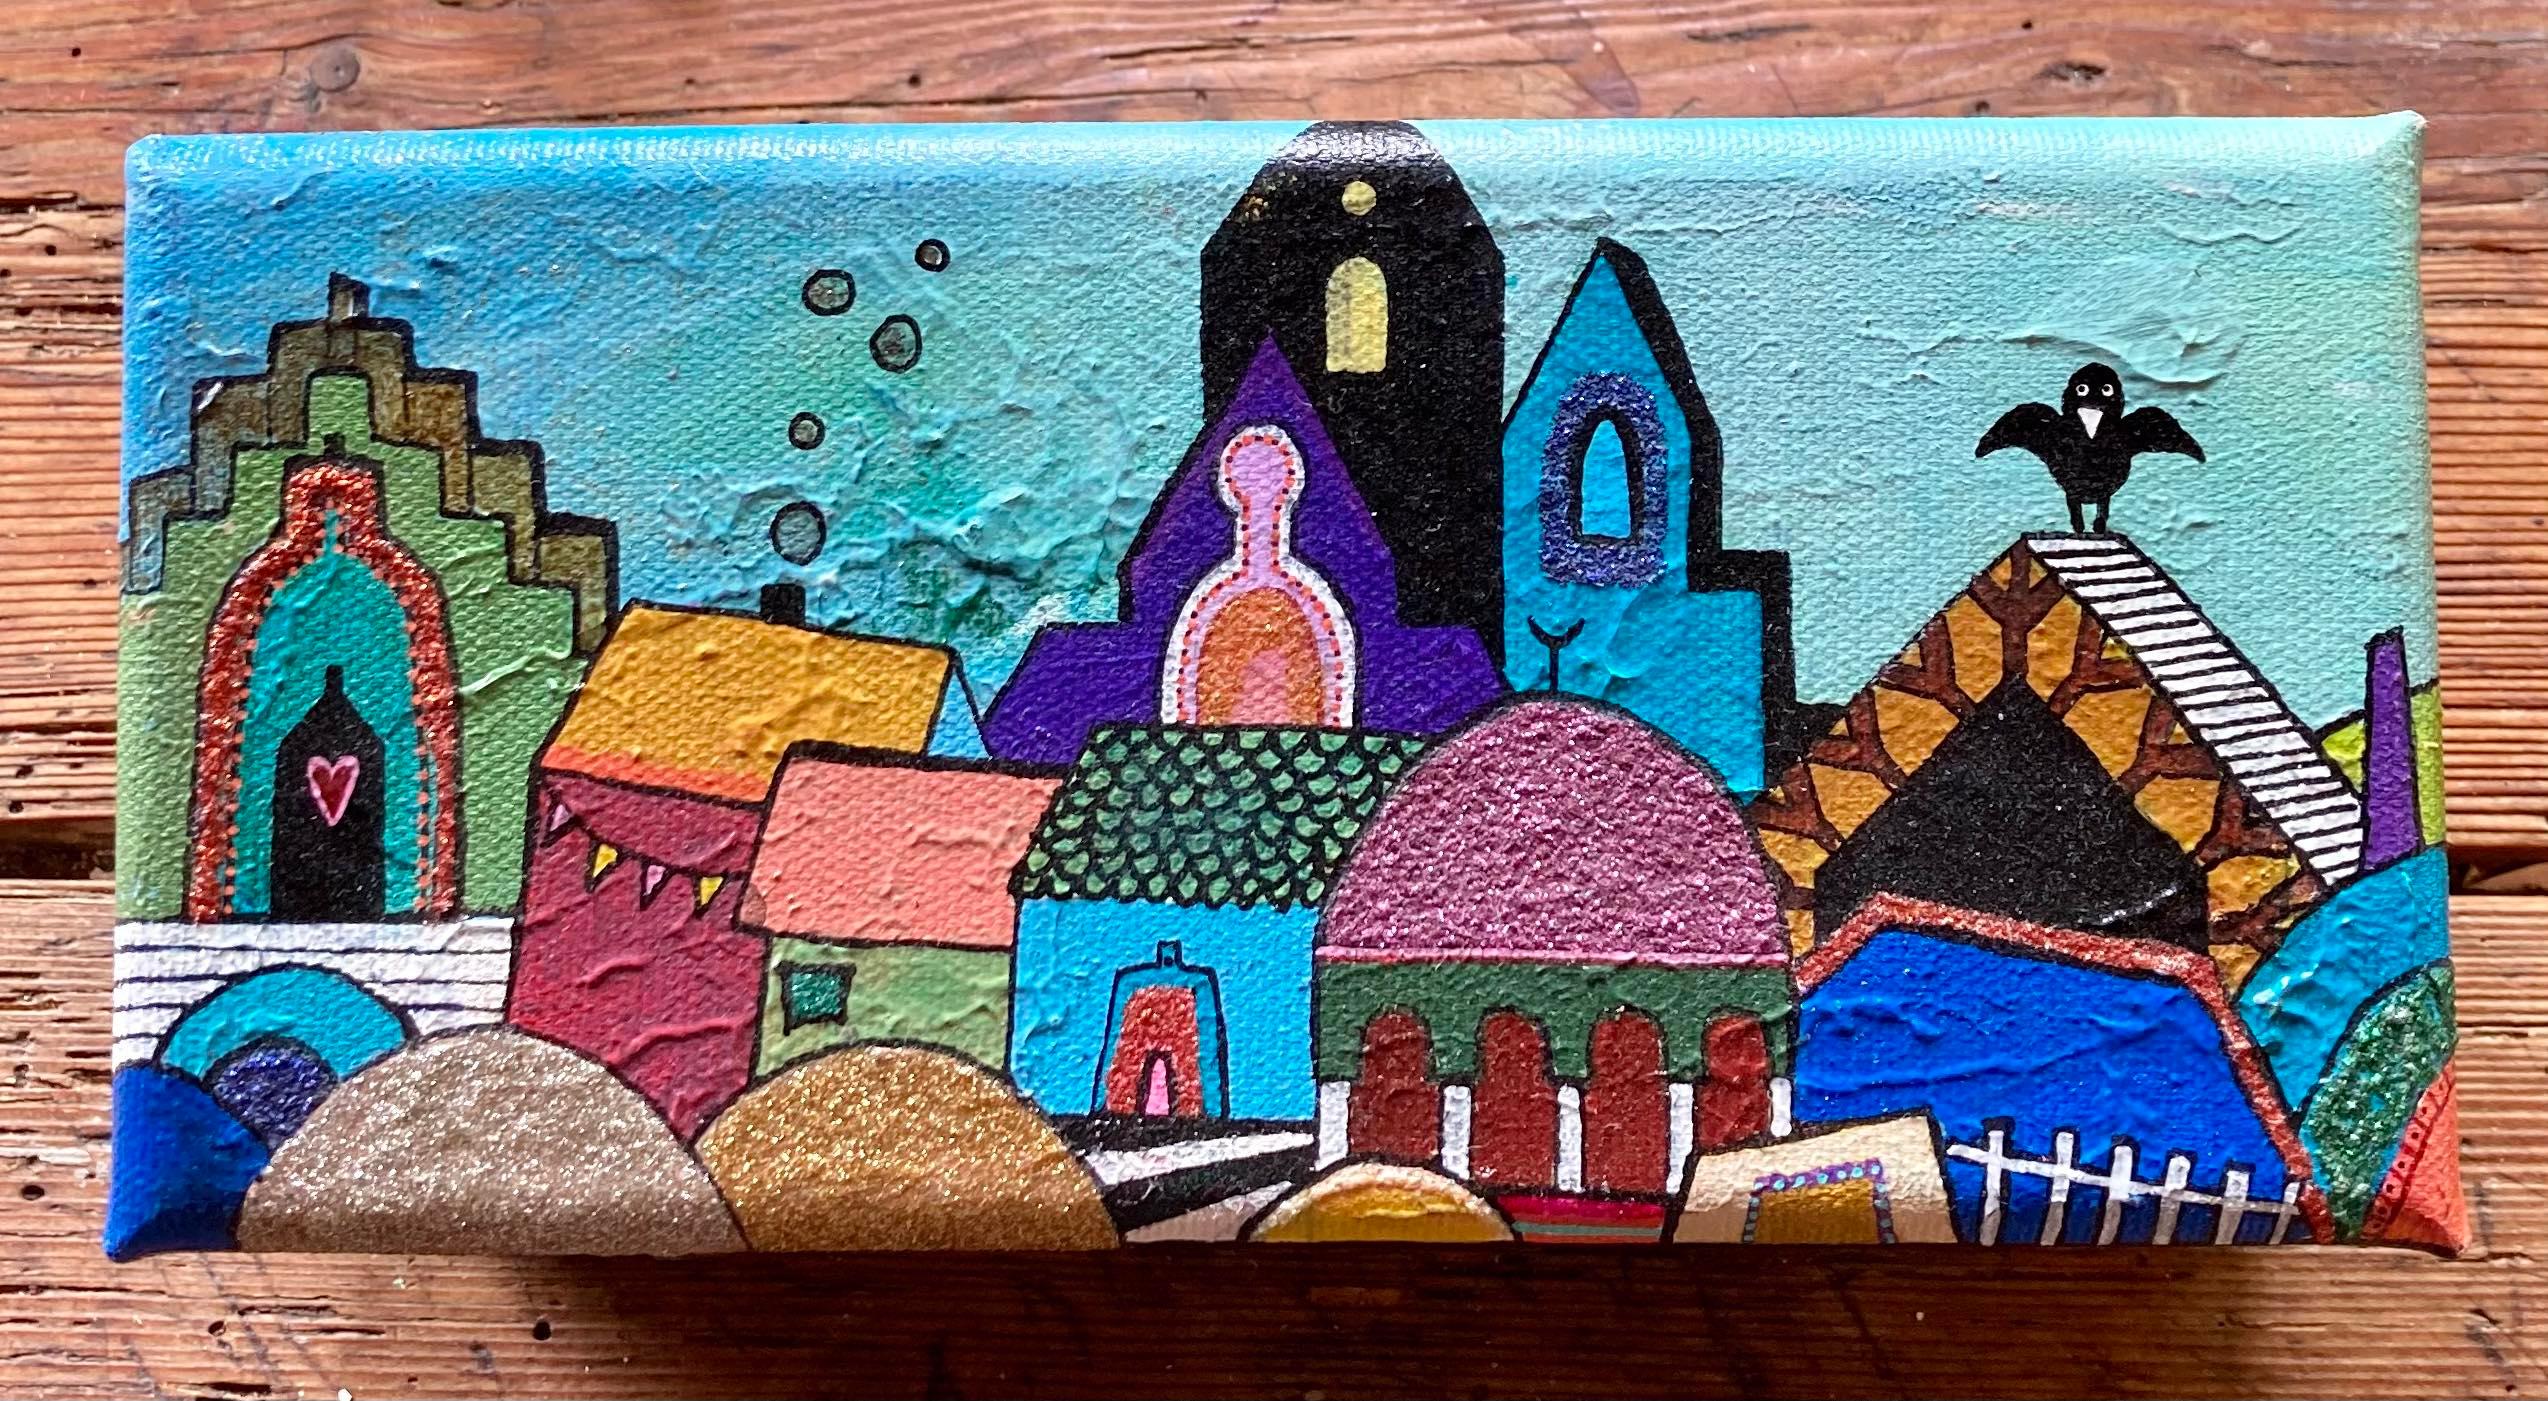 "Life is such a love story" 10 x 20 (box)